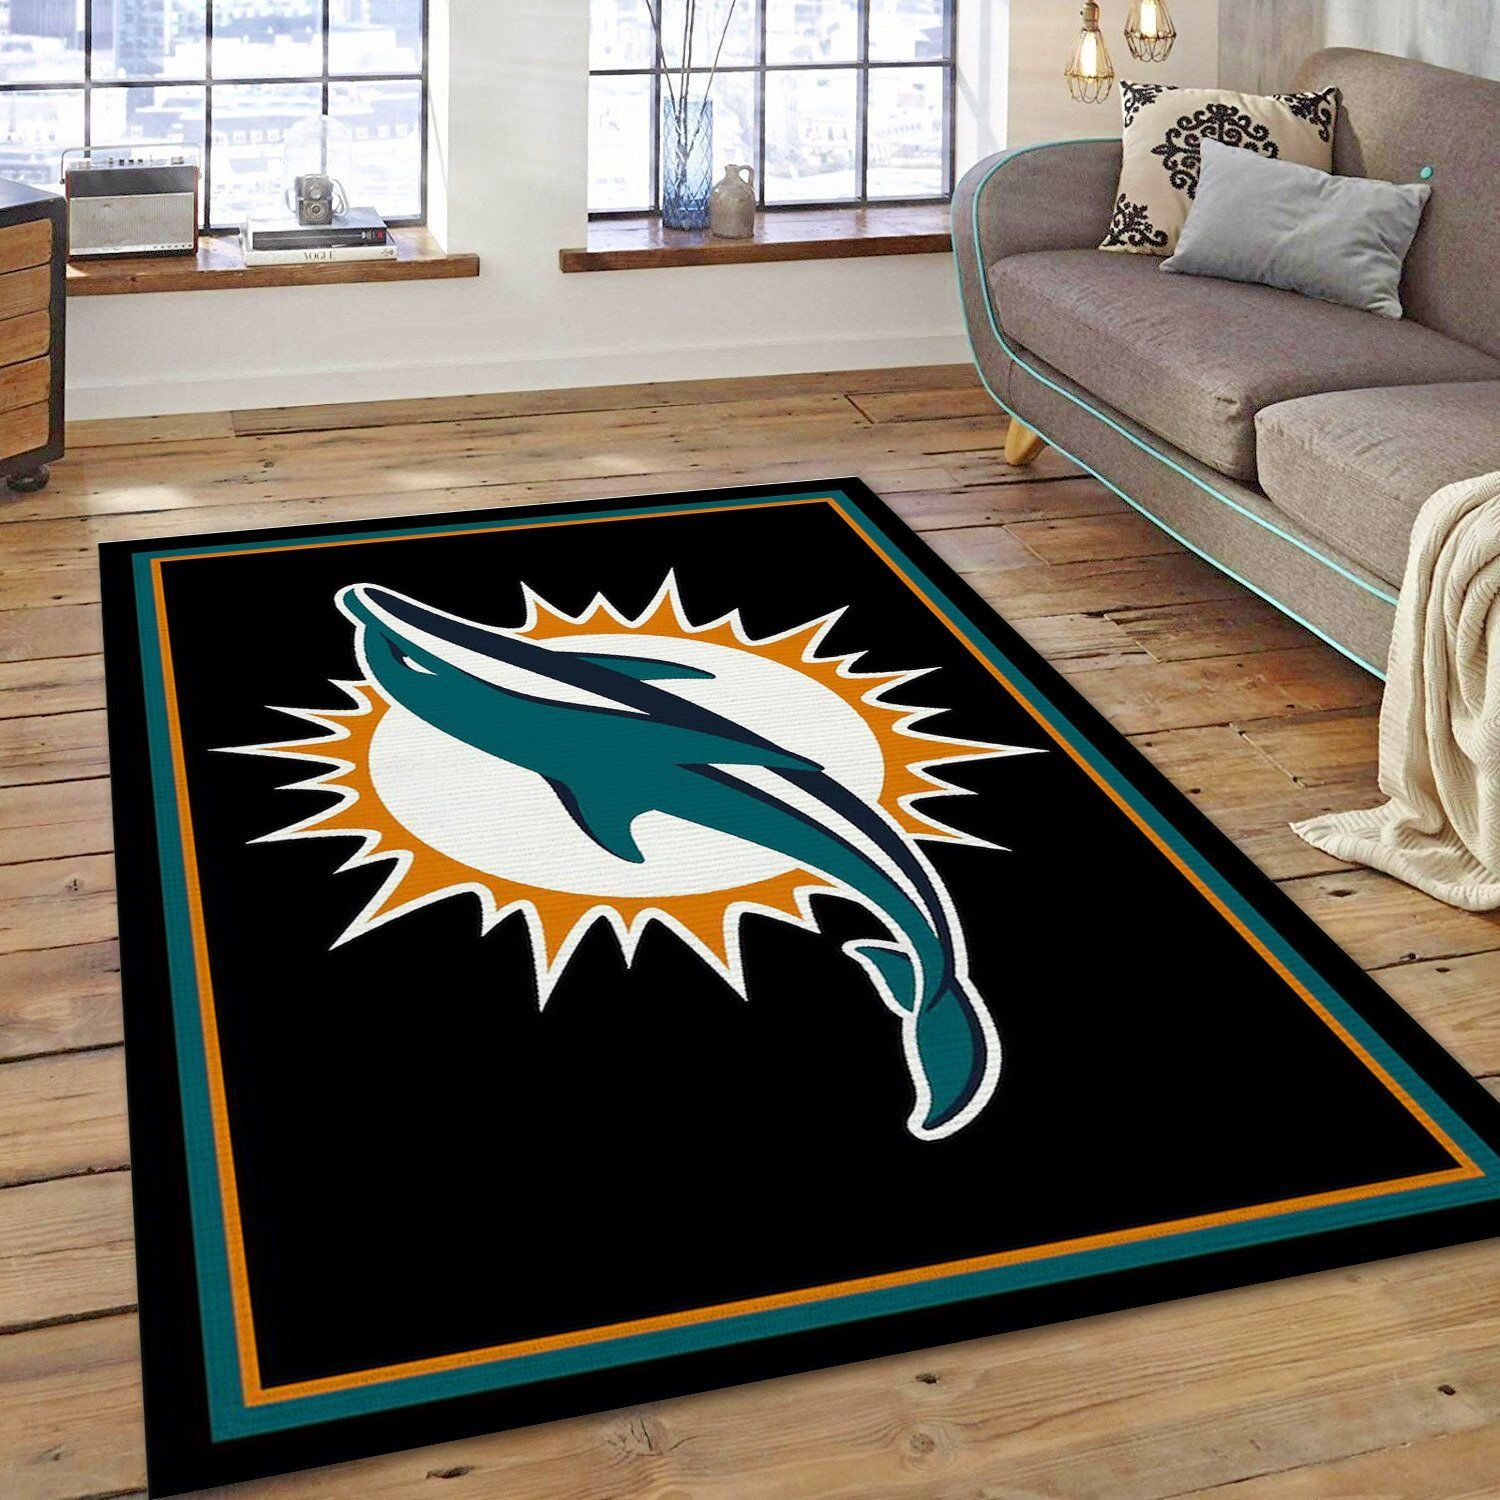 Nfl Miami Dolphins Team Floor home decoration carpet rug for football fans